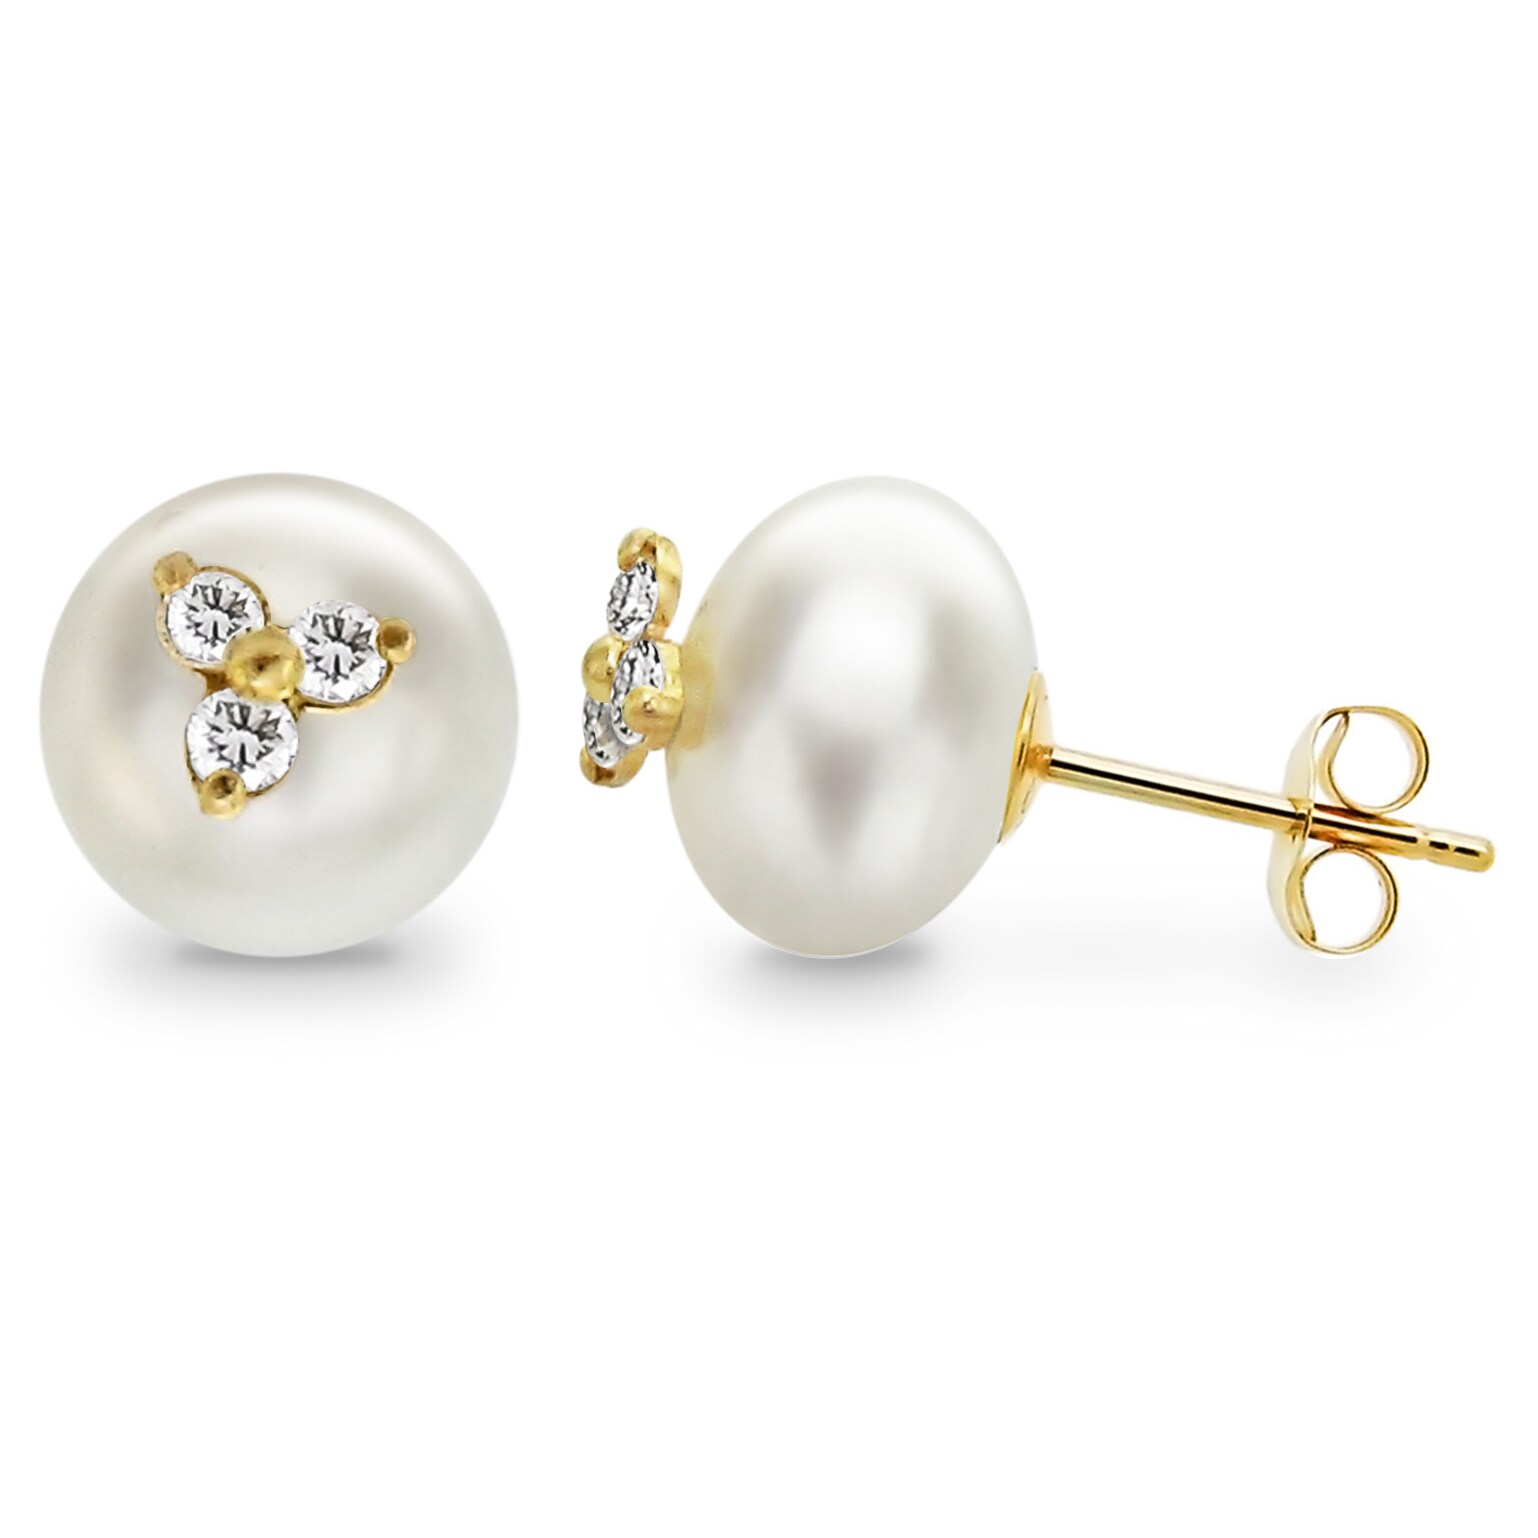 11-12mm Natural White Freshwater Pearl 14K Gold Plated Stud Earrings